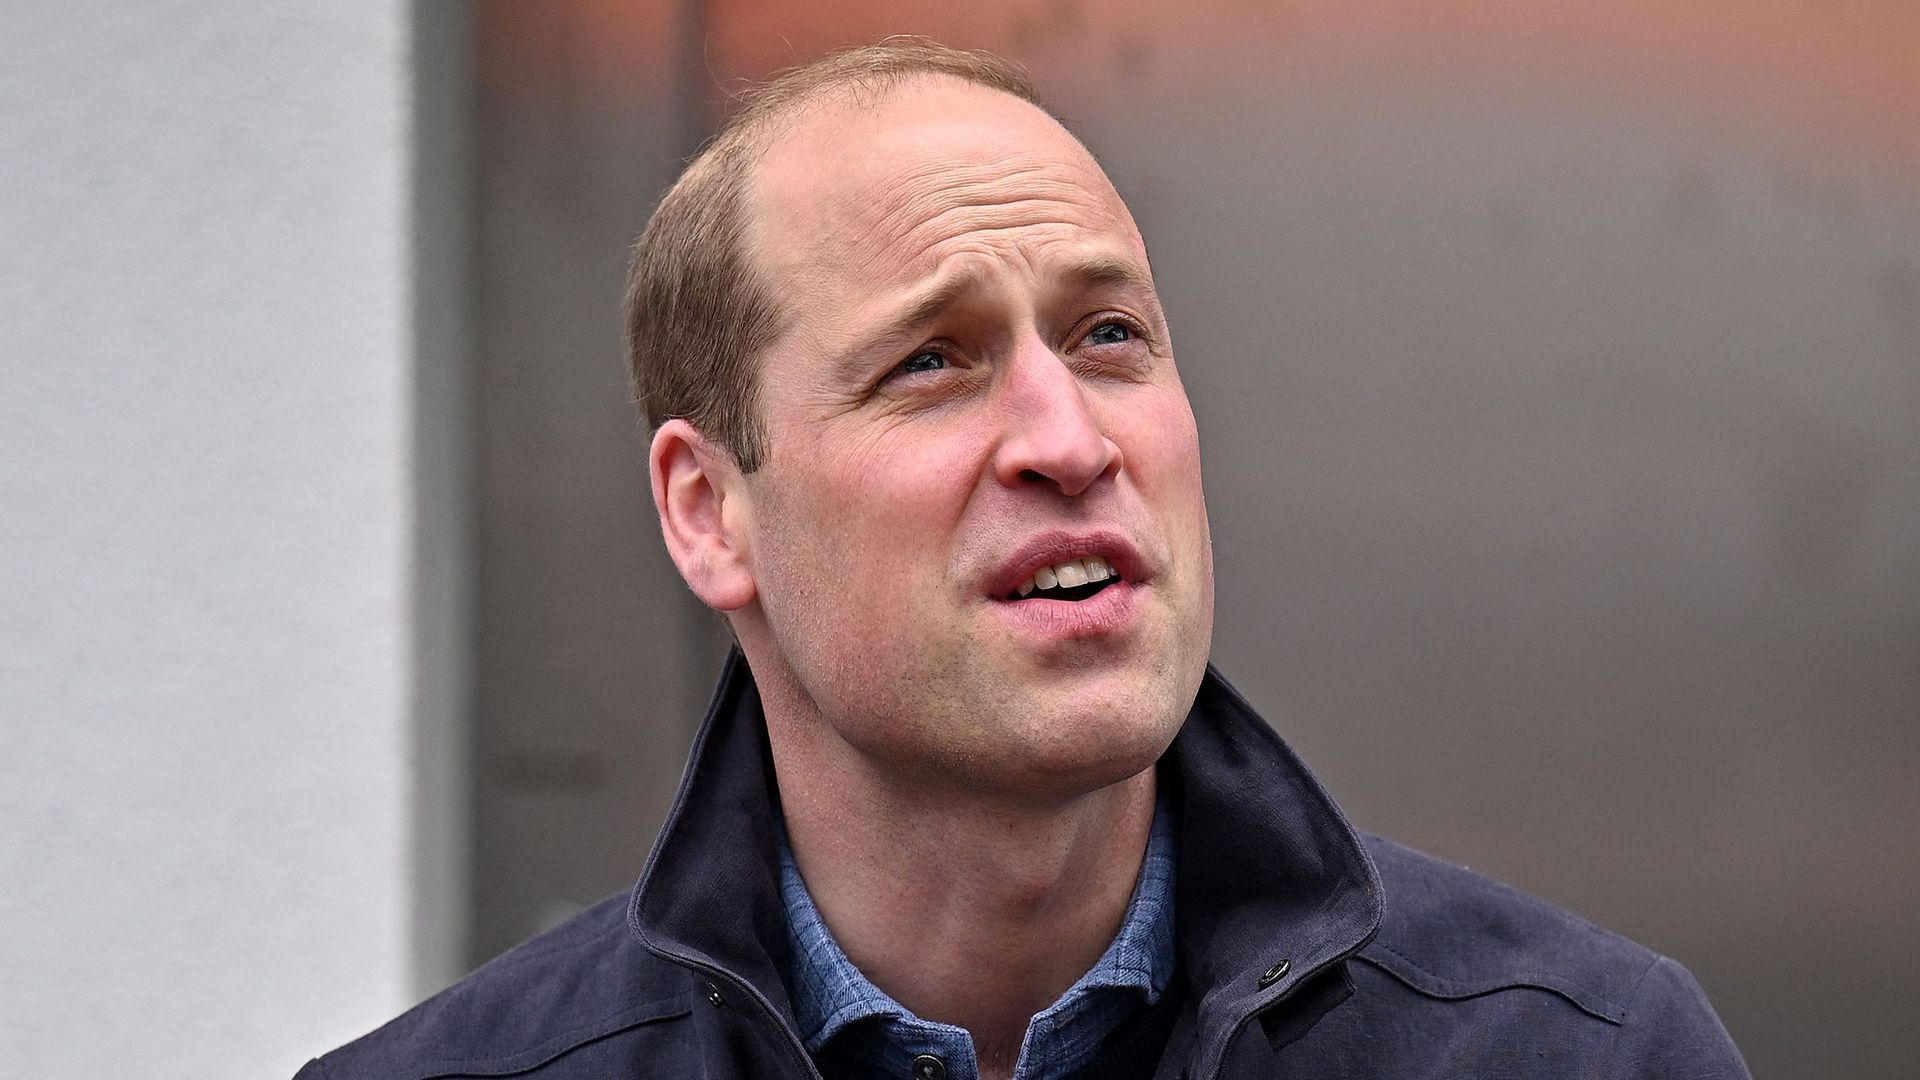 Prince William looking pained